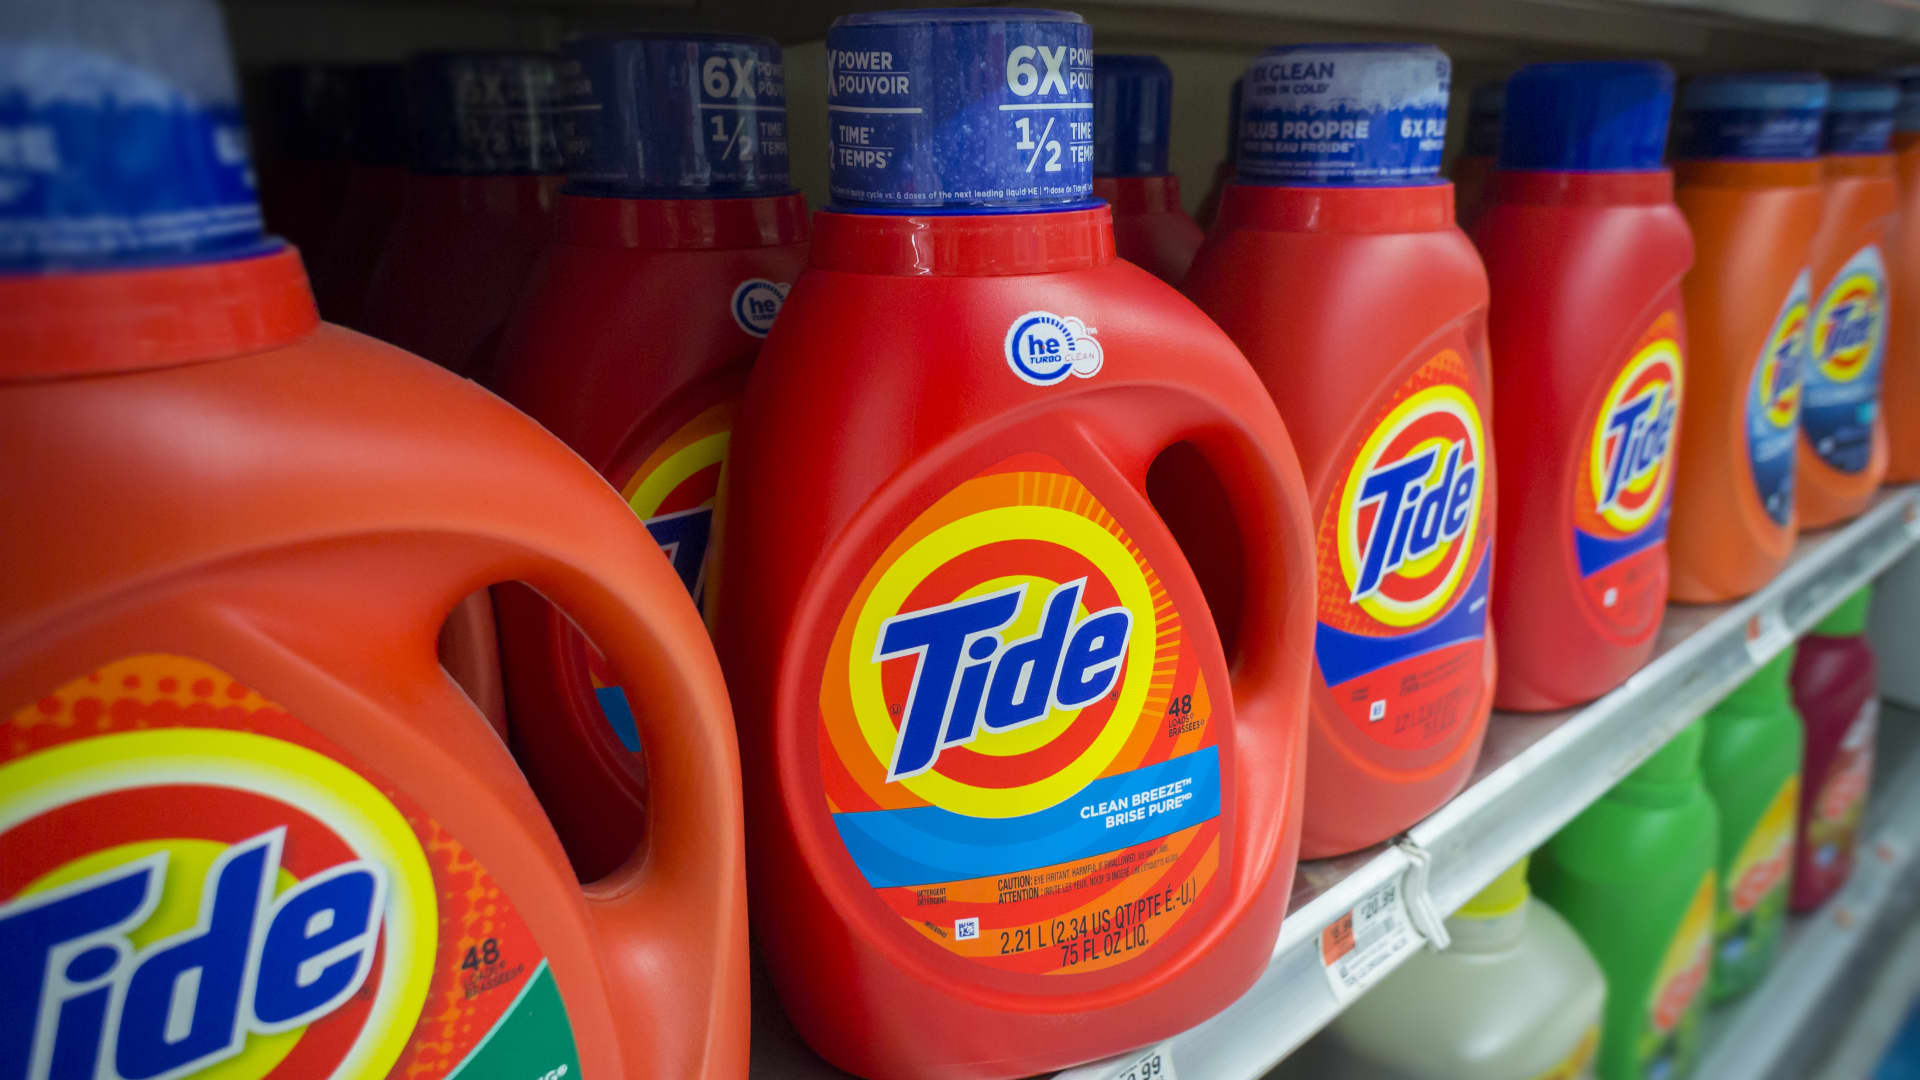 Procter & Gamble earnings beat as consumers hang on to pandemic cleaning habits; price hikes ahead